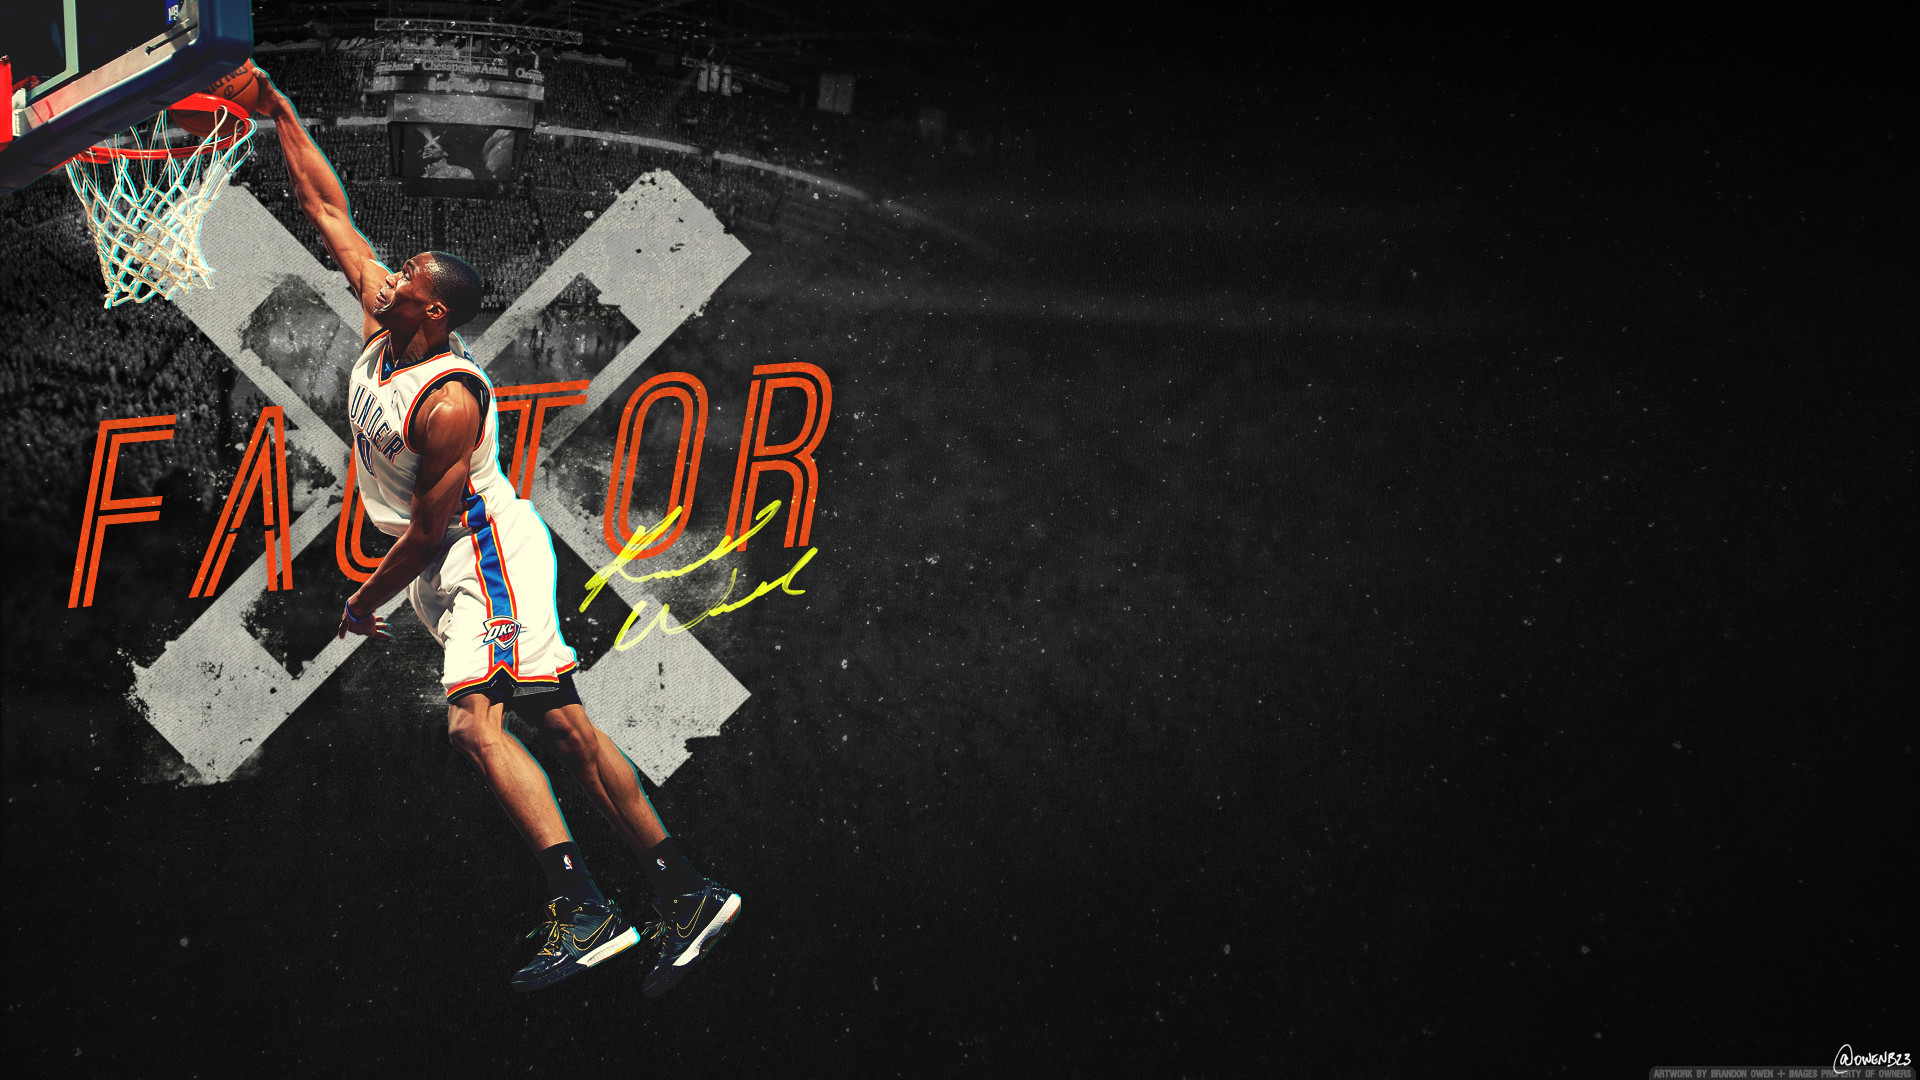 Go Back Images For Russell Westbrook Dunk Wallpaper